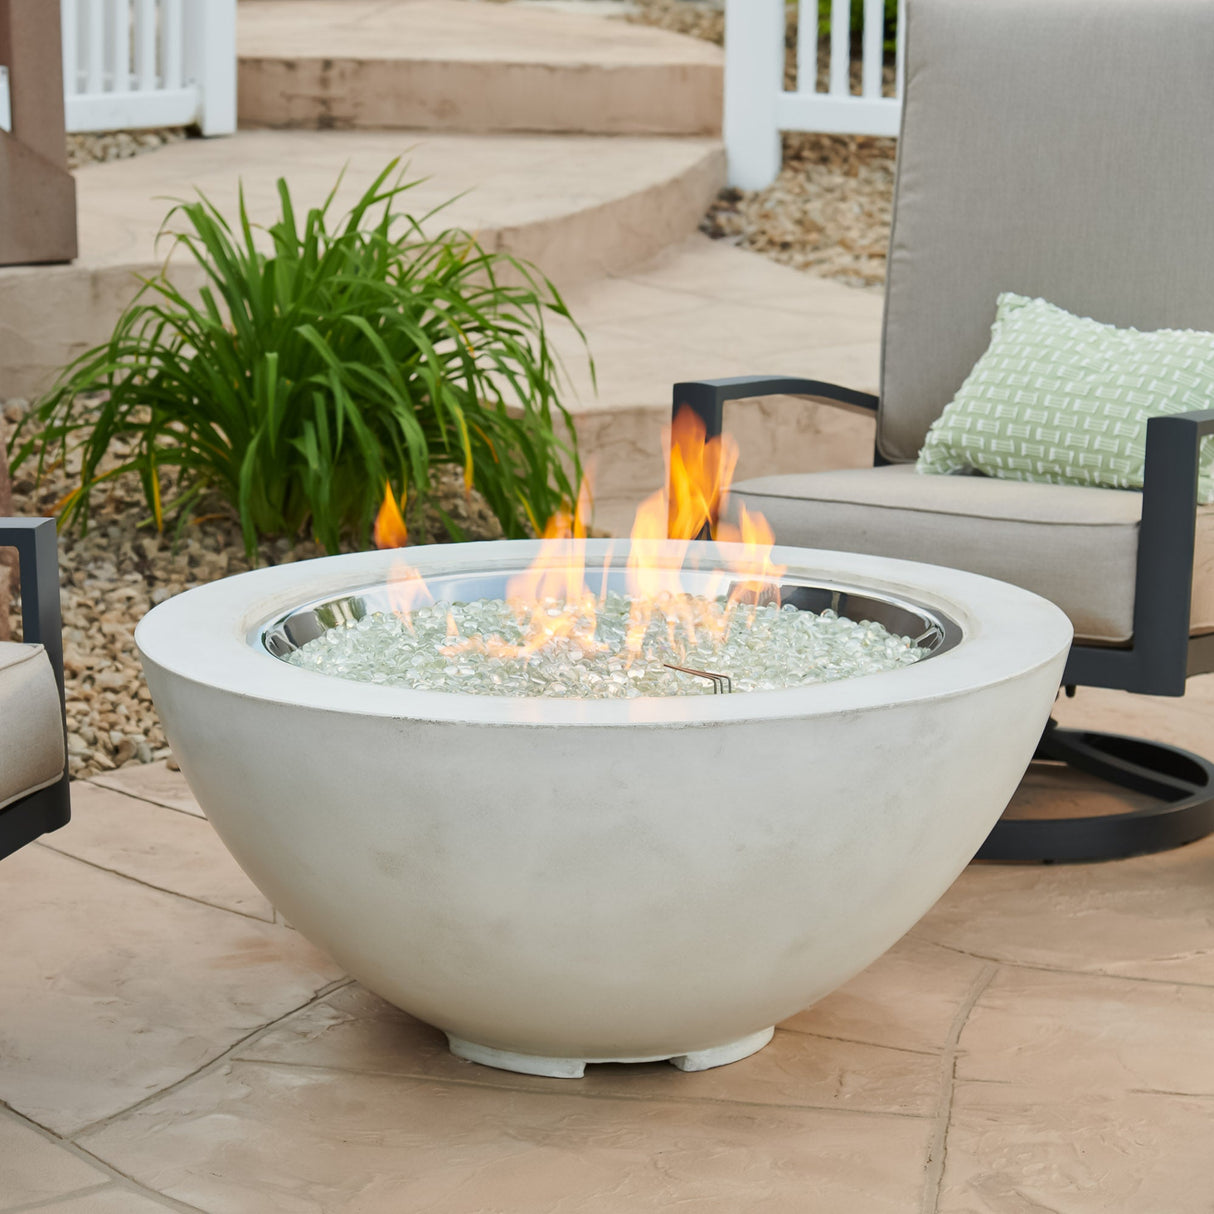 A White Cove Round Gas Fire Pit Bowl 42" placed around patio furniture